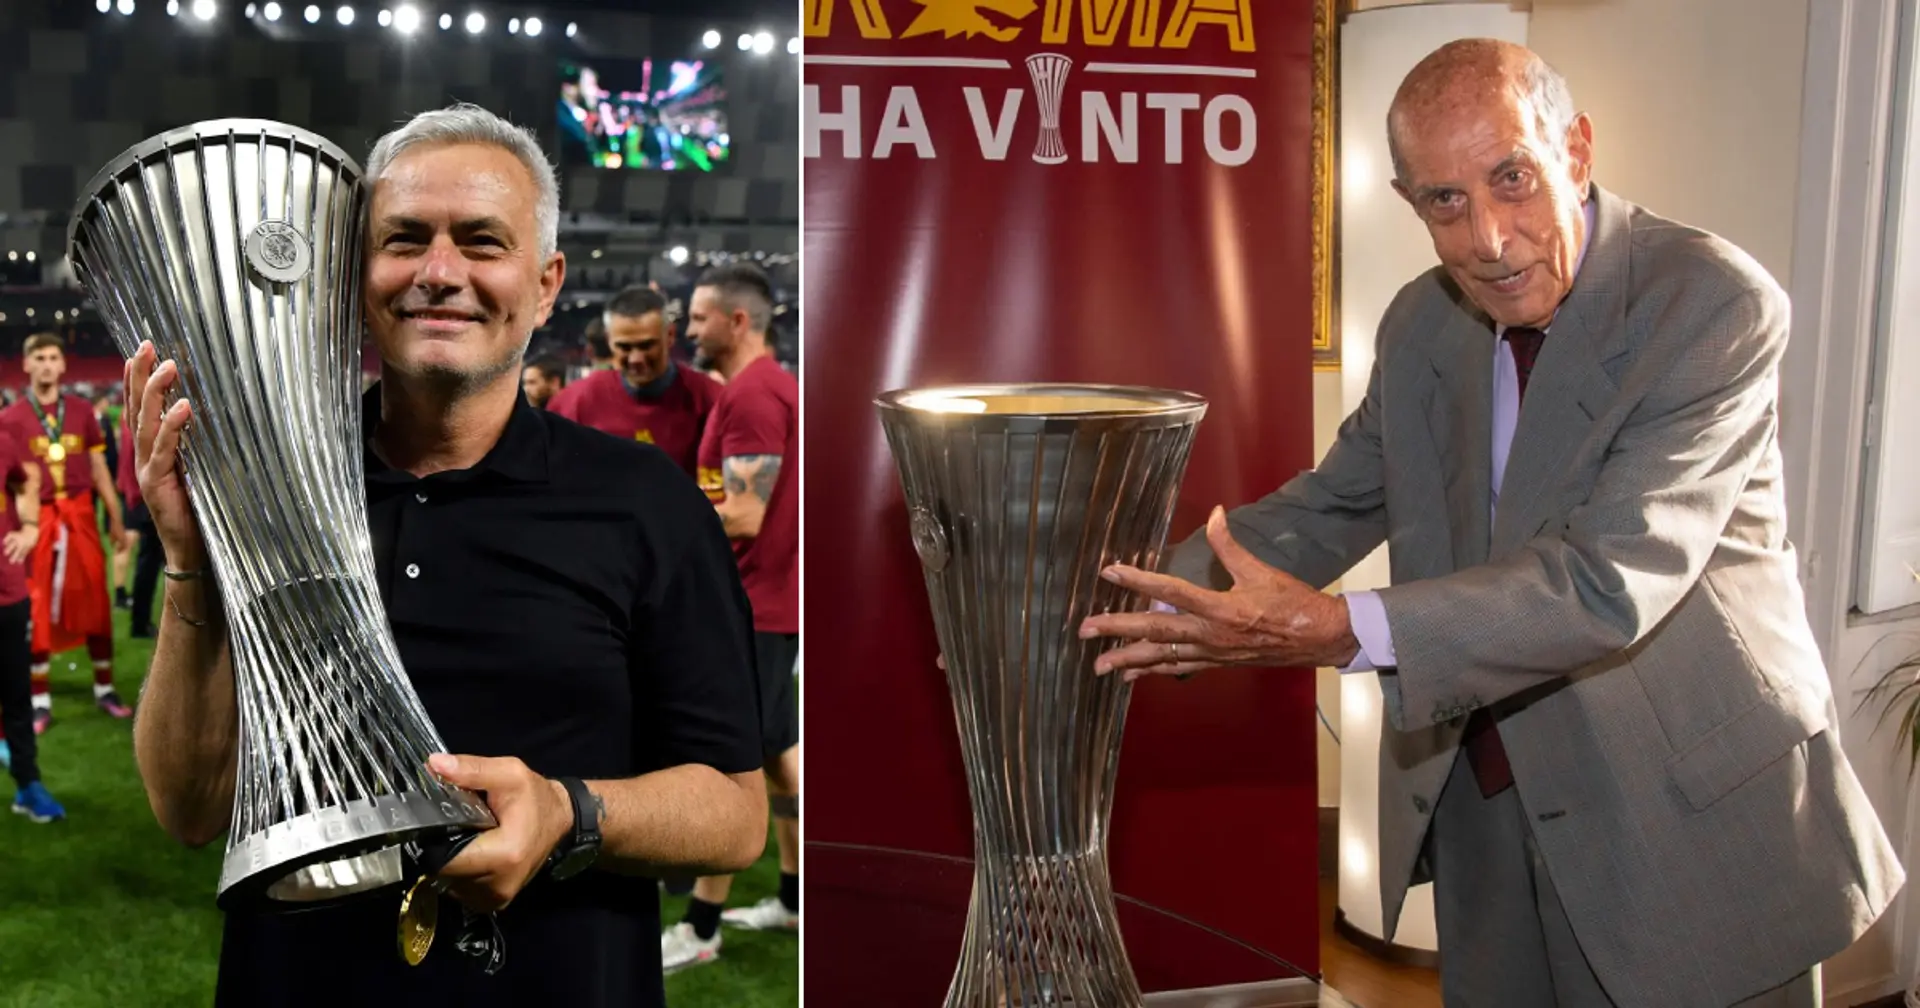 AS Roma surprise their oldest season-ticket holder by bringing Conference League trophy to his home